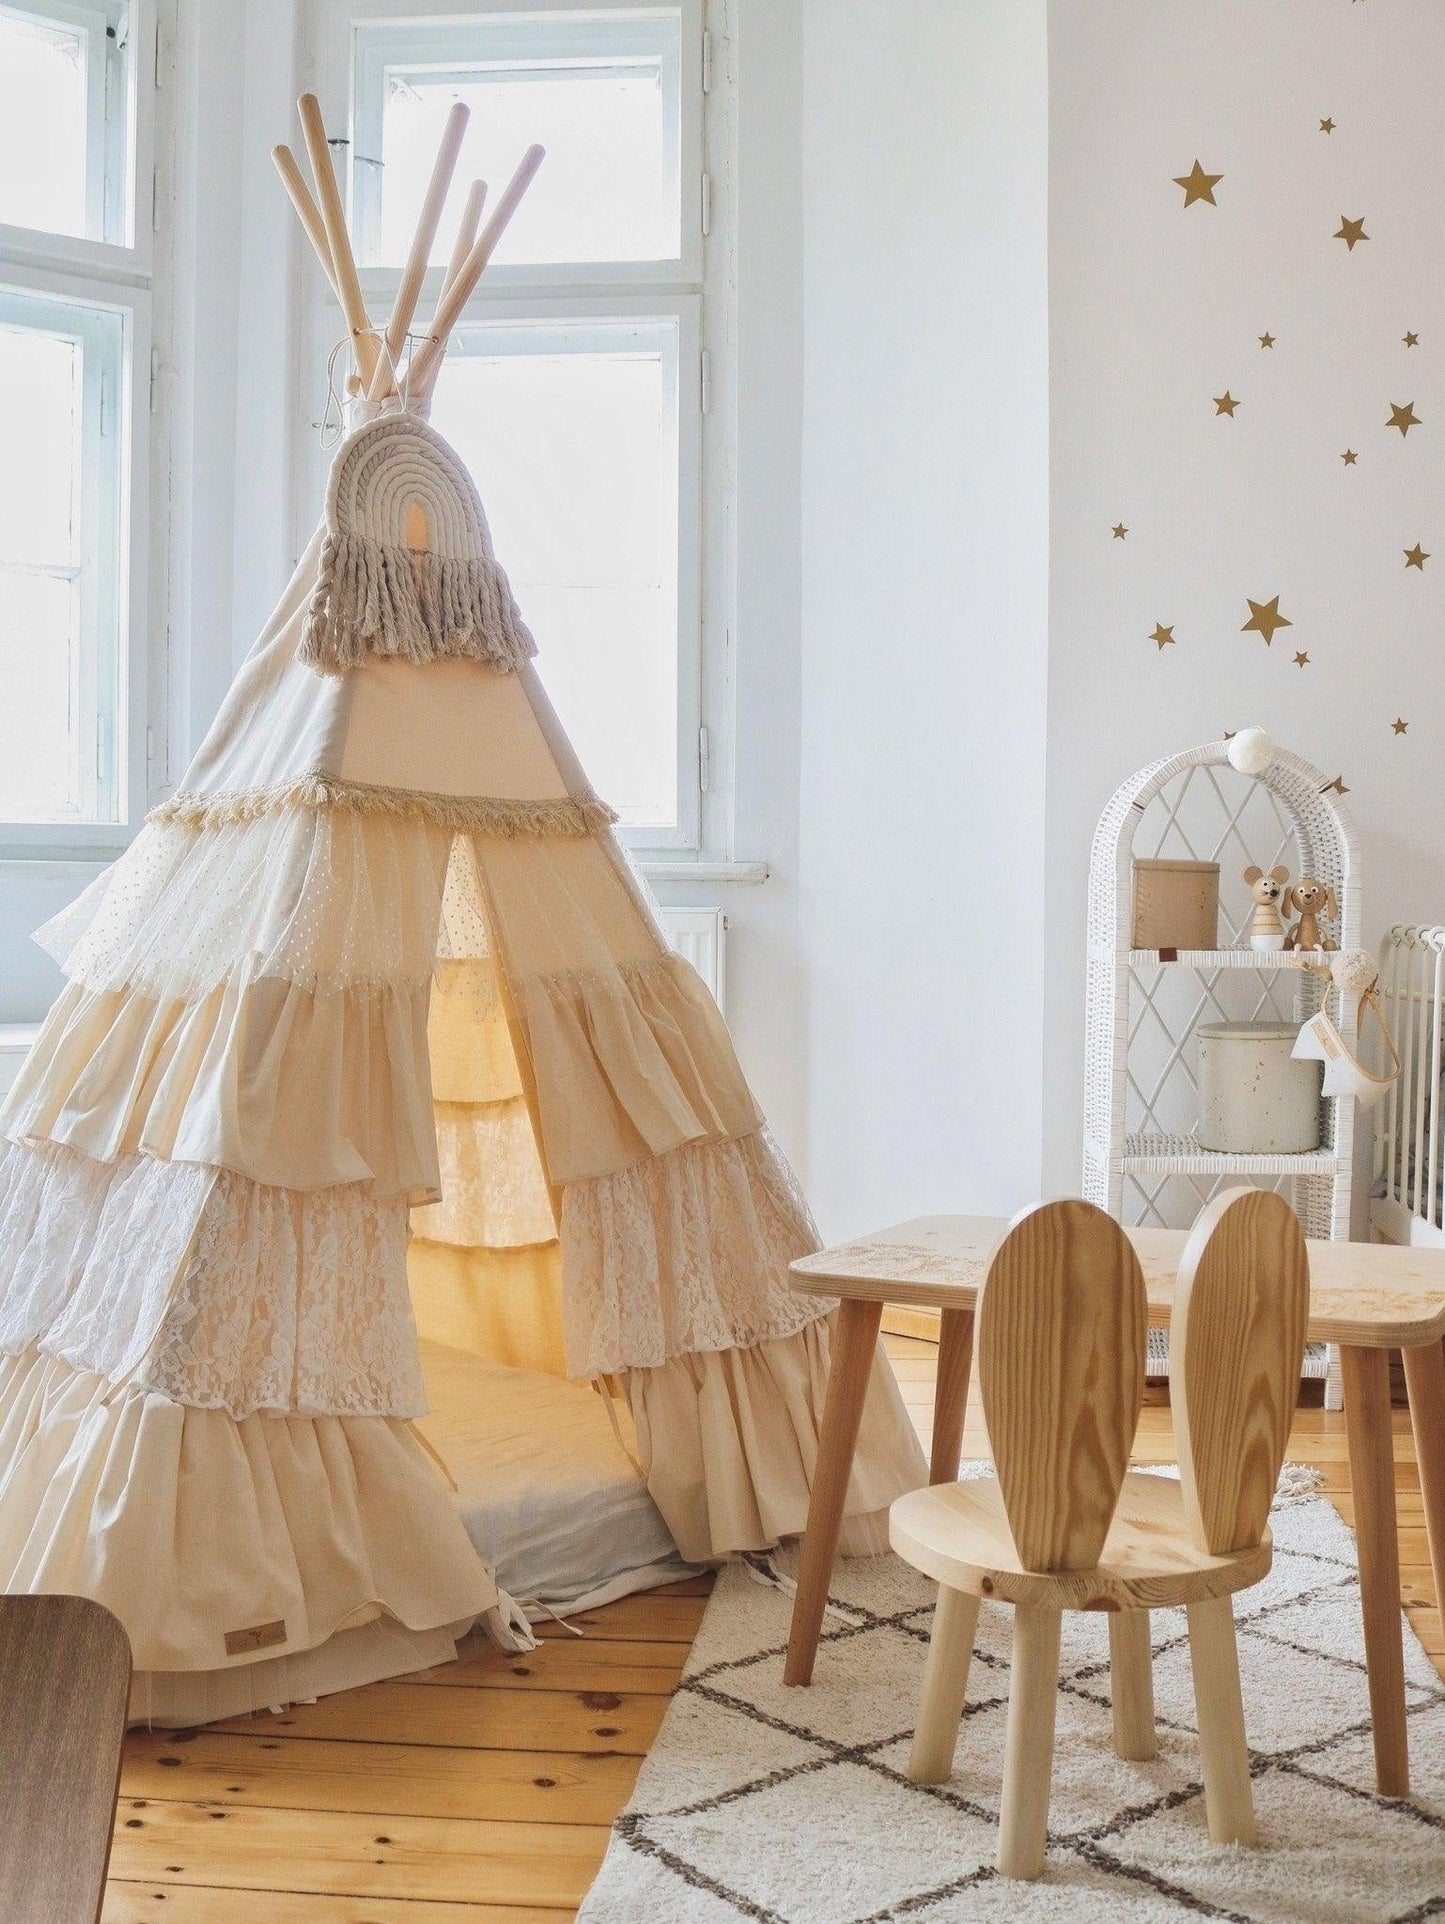 “Shabby Chic” Teepee Tent with Frills and "White" Leaf Mat Set